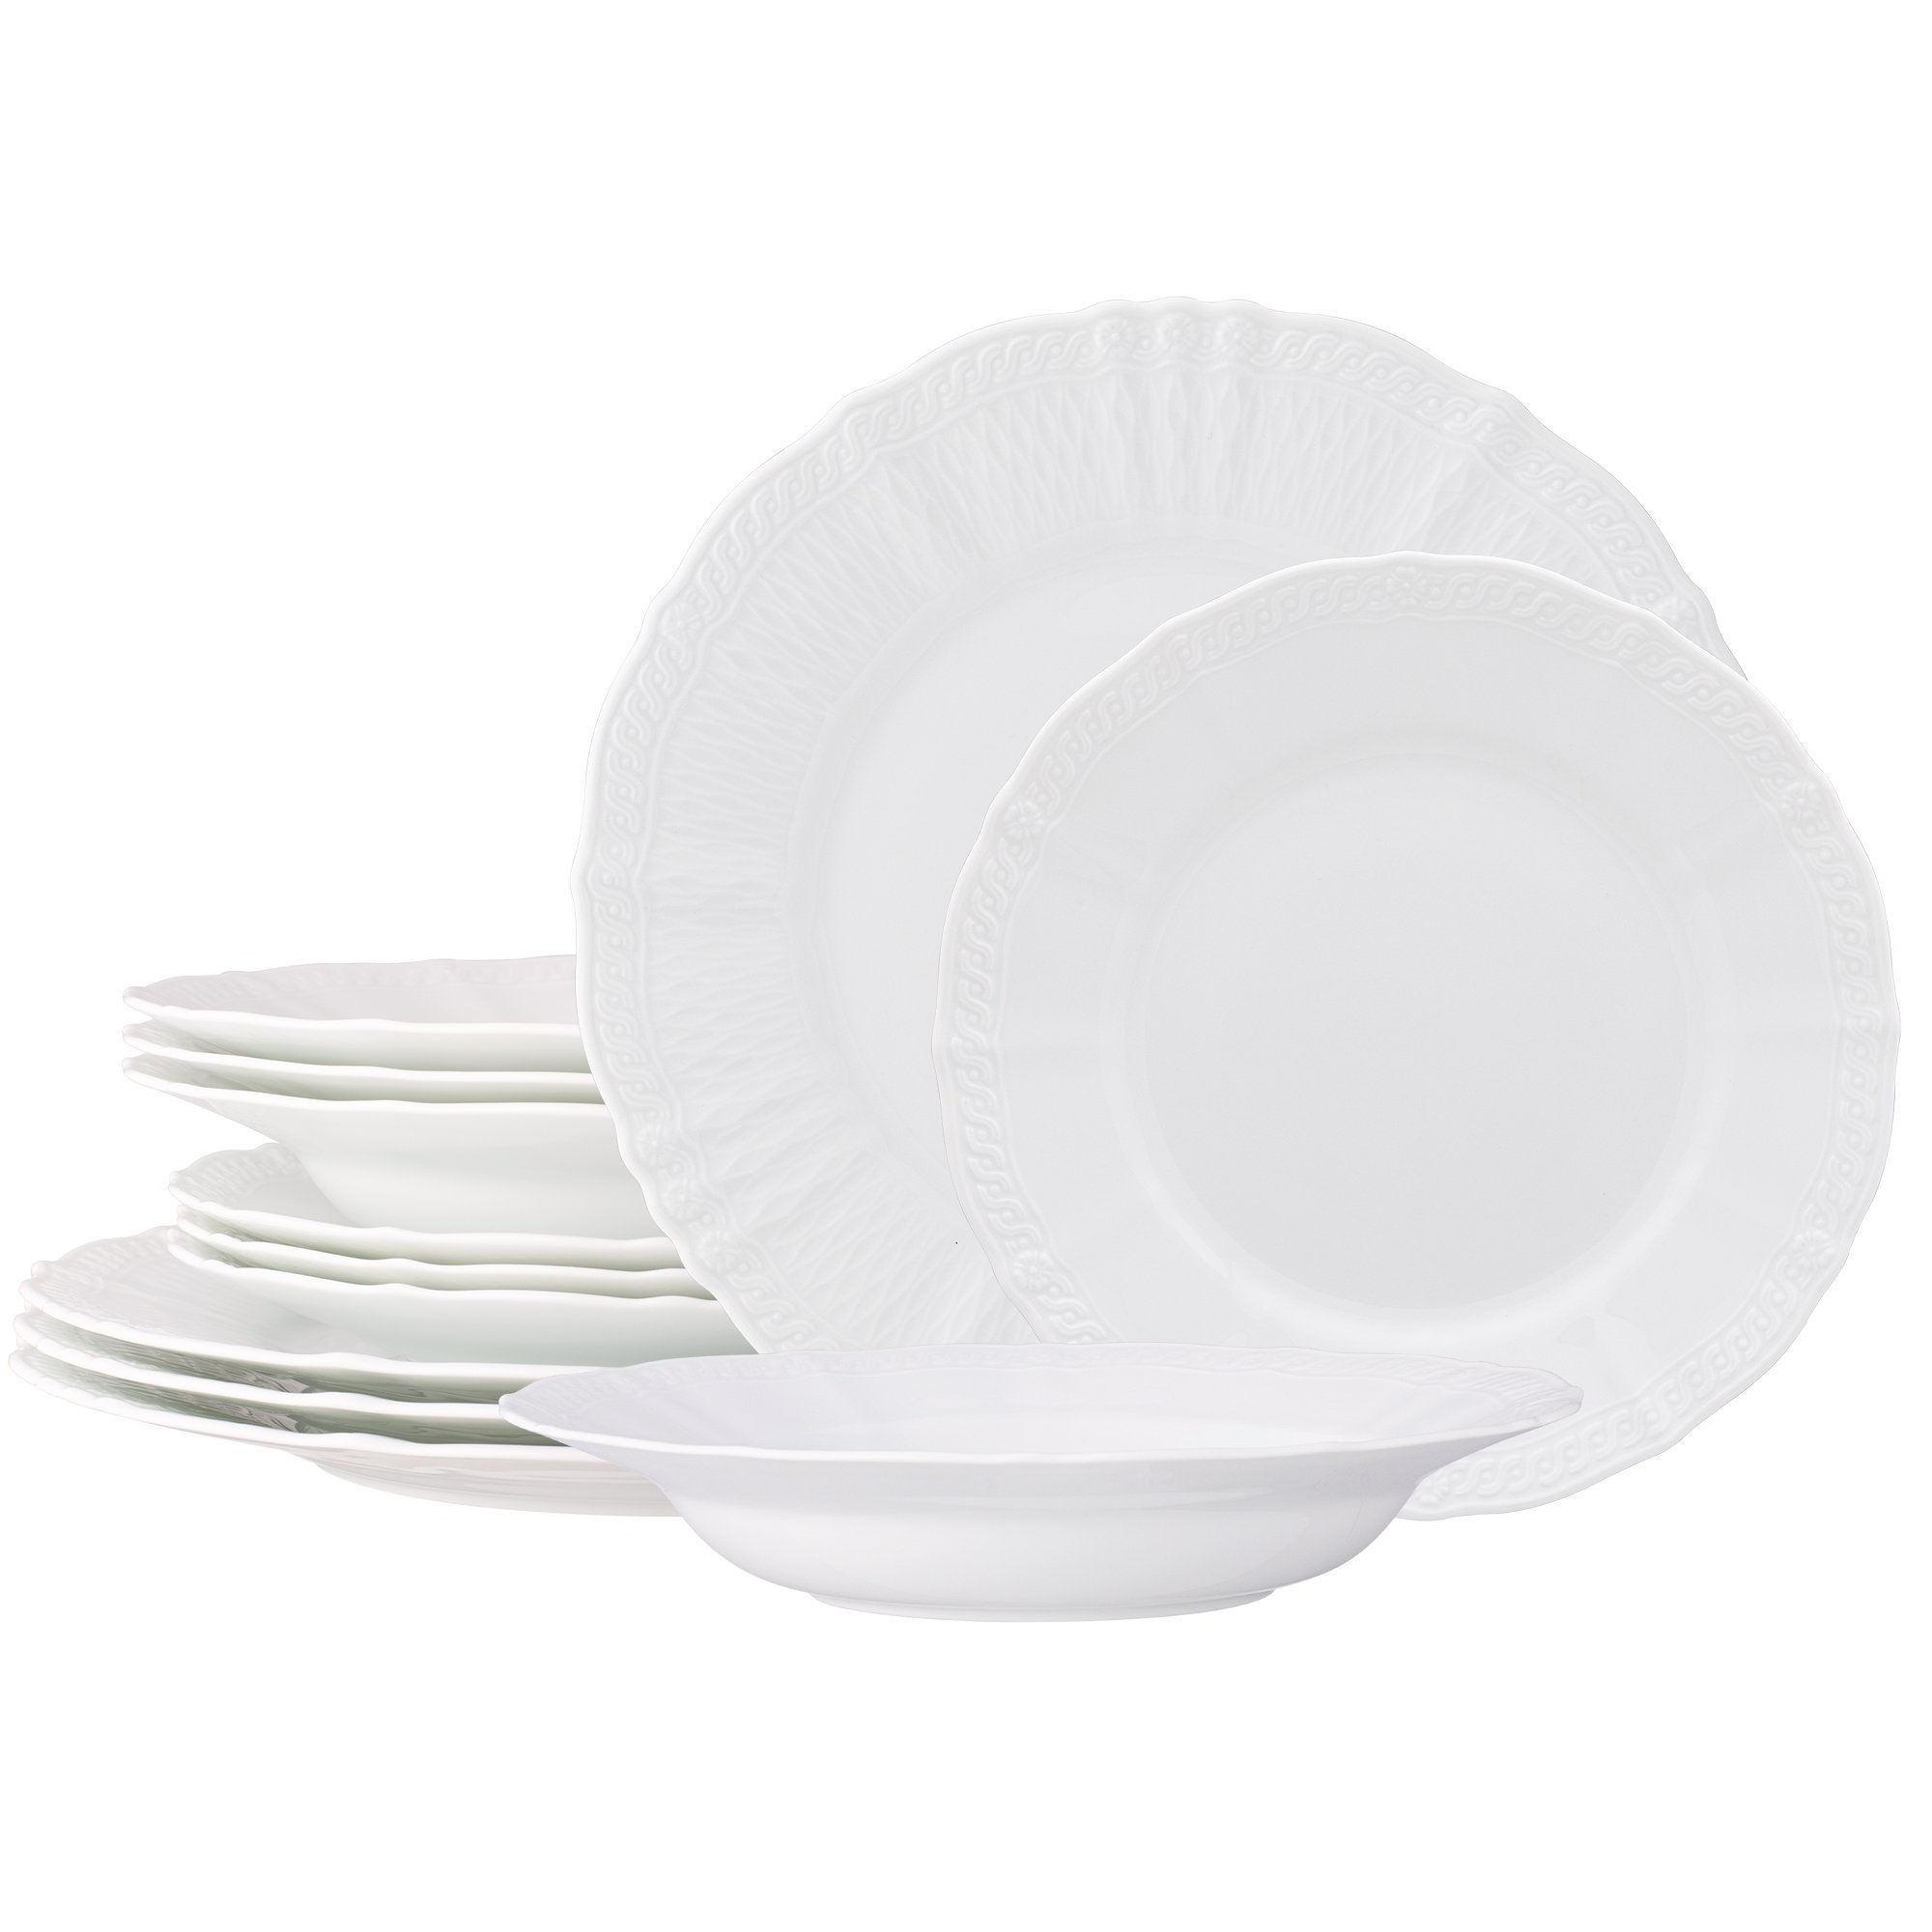 12 Pack Glossy White Swirl Rim Round Plastic Dinner Plates, Disposable  Party Plates 10